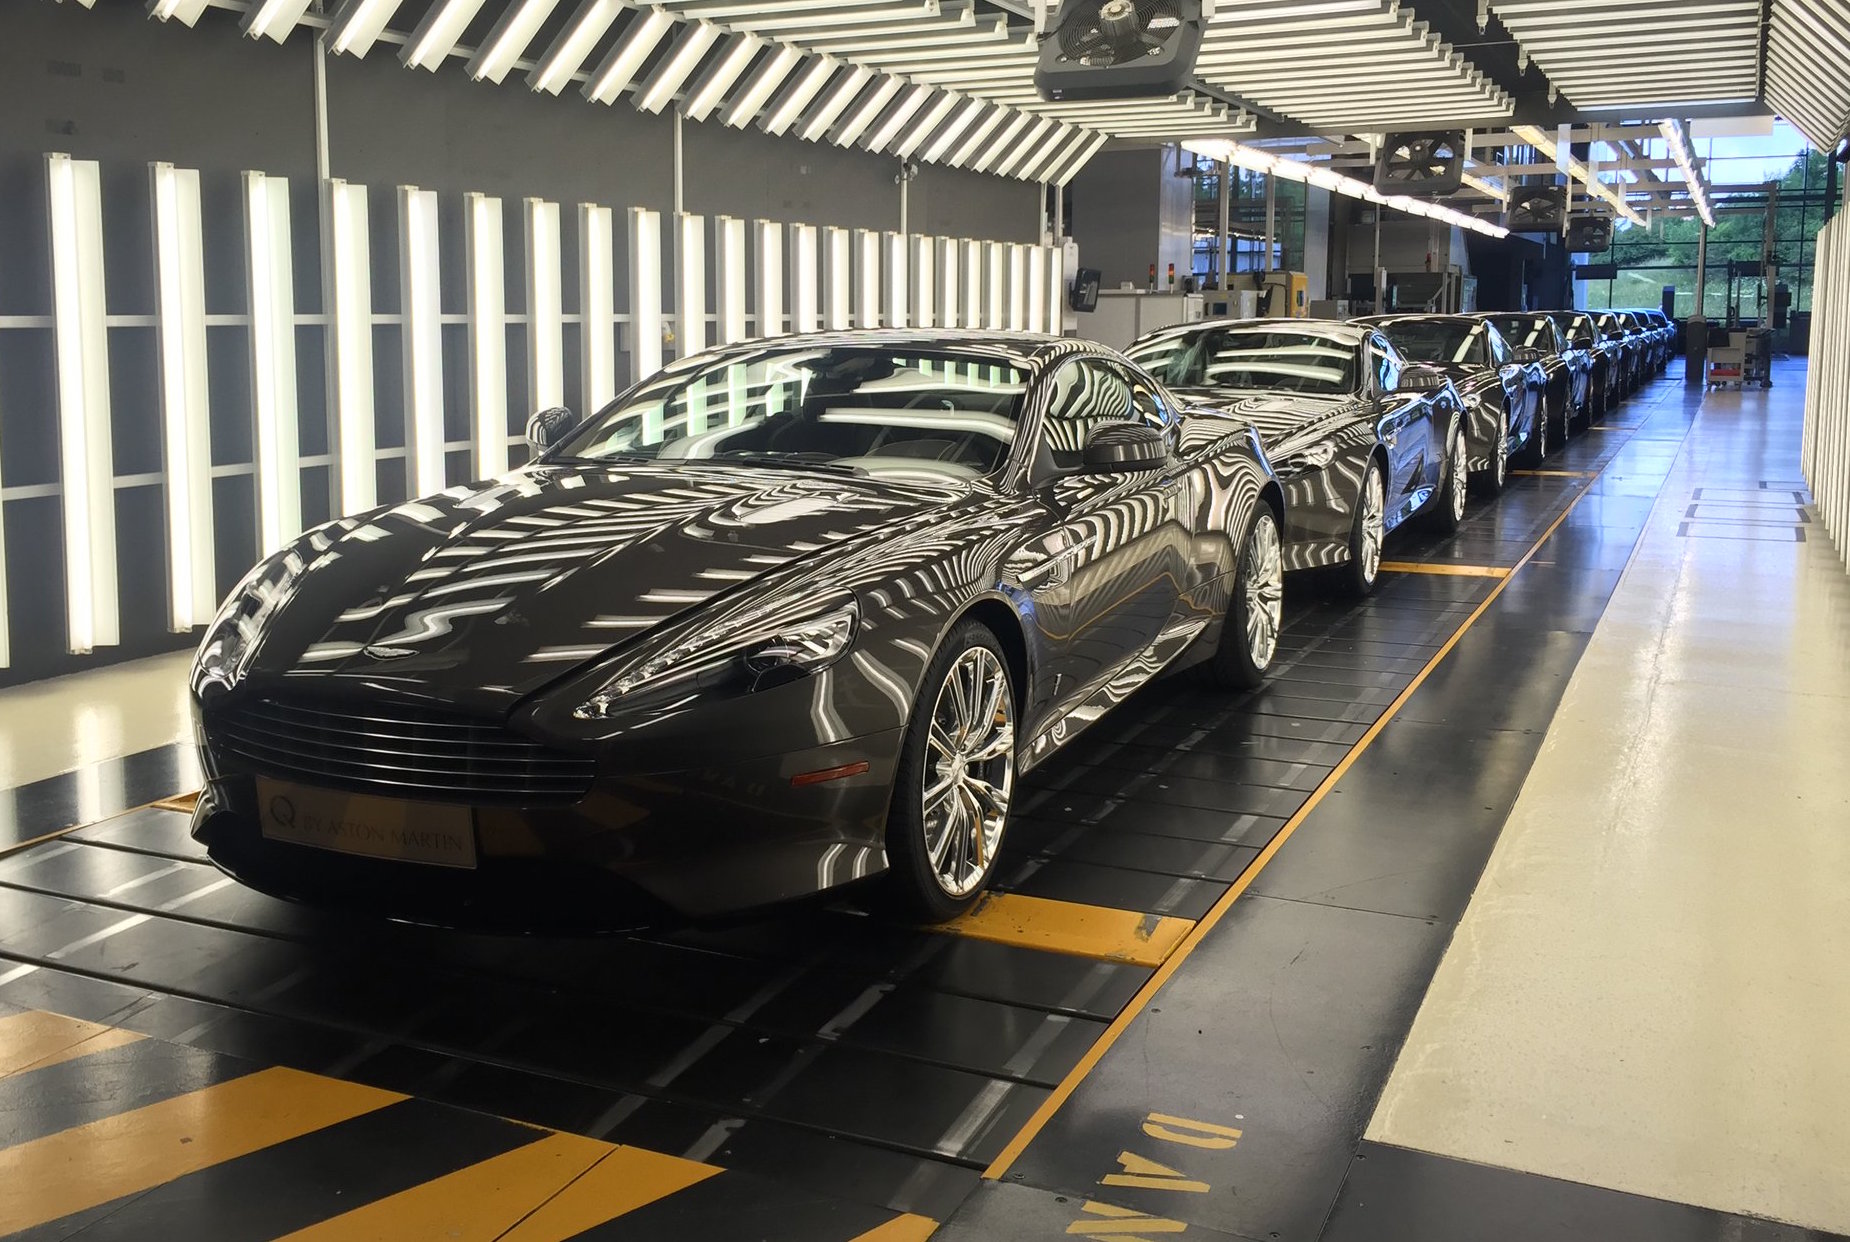 Aston Martin DB9 production comes to an end